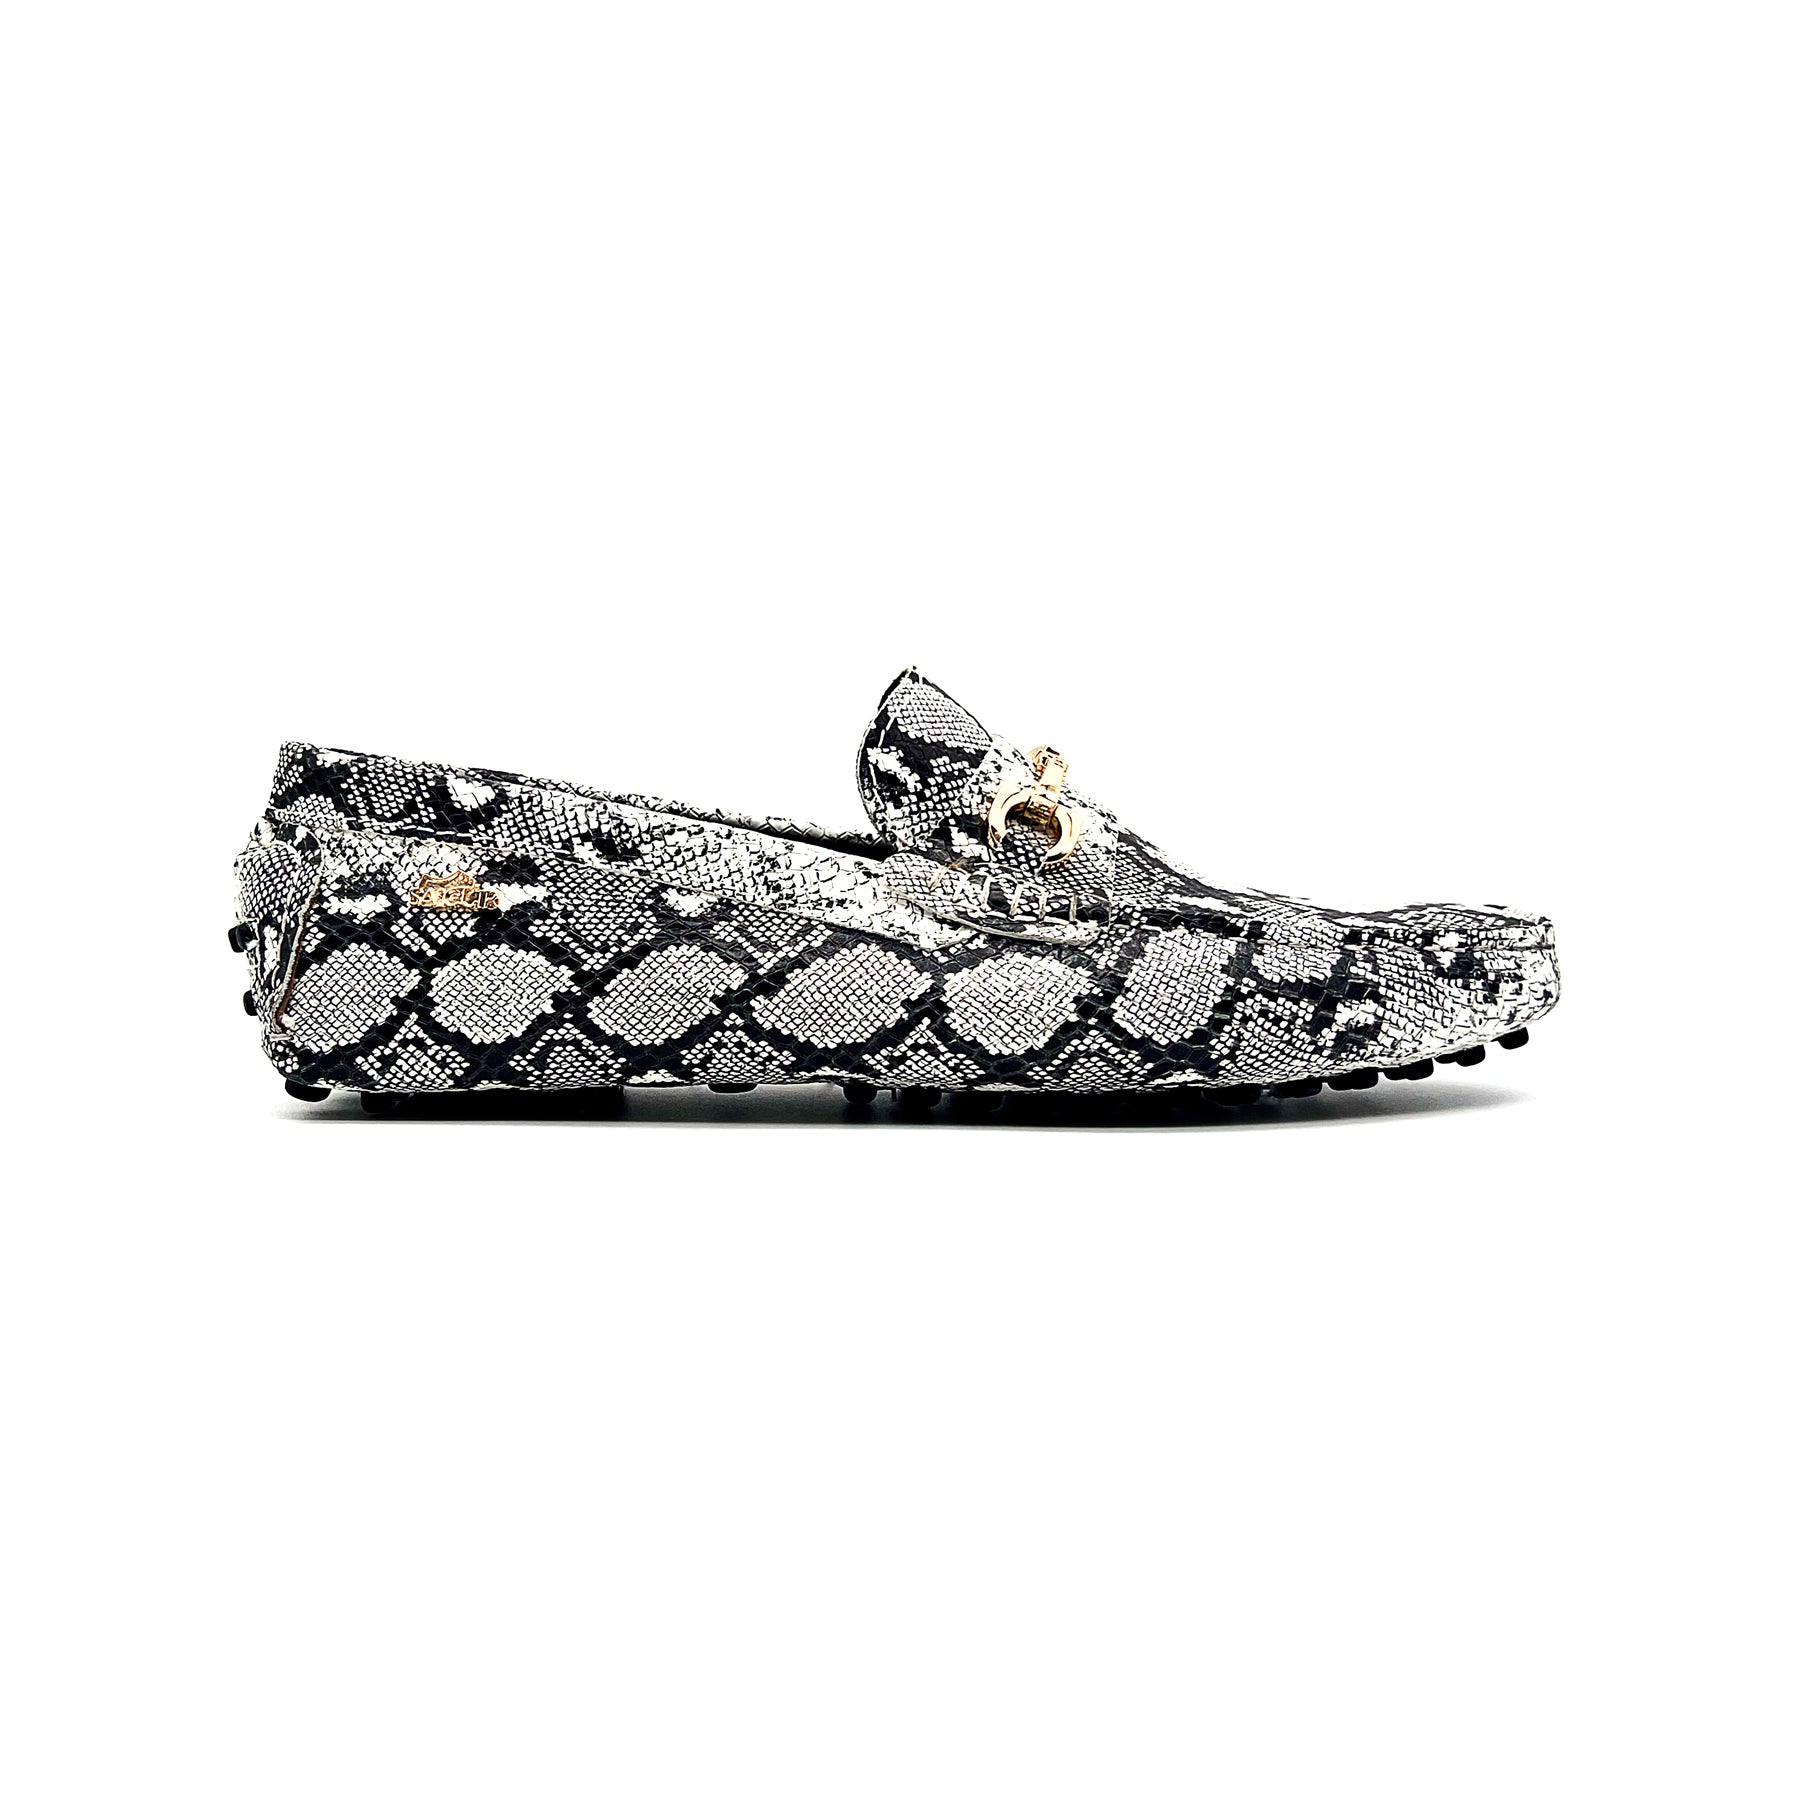 Italian Snake Print Leather Shoes